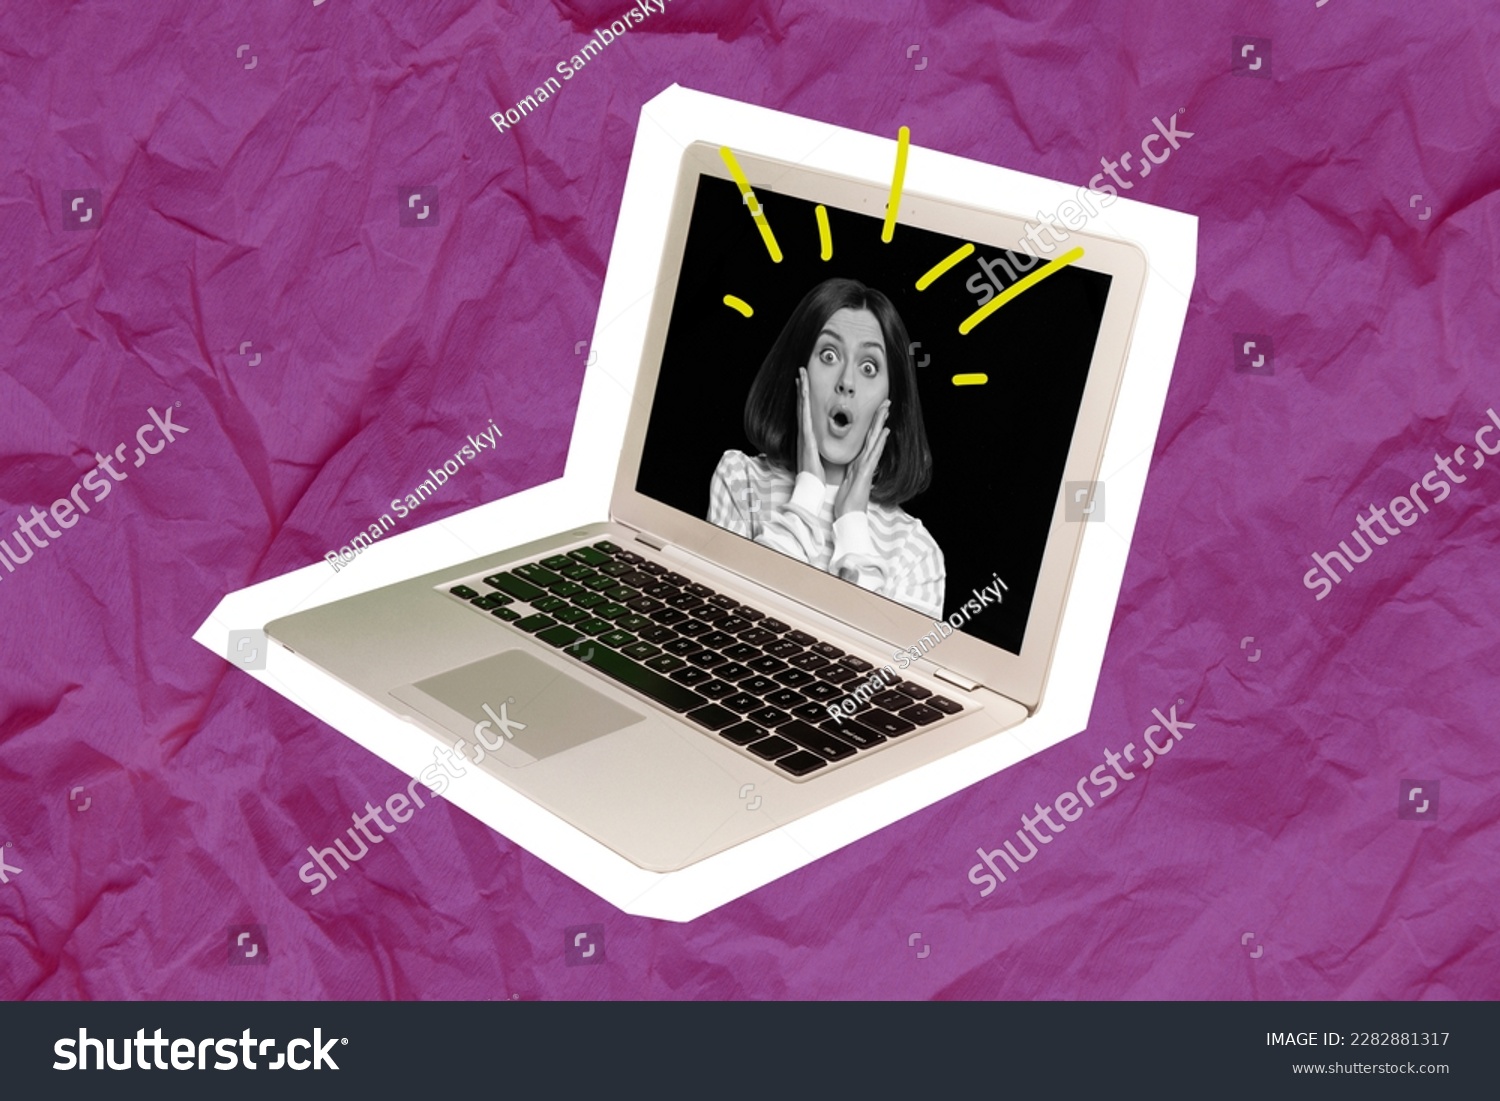 Creative 3d collage wallpaper funny excited girl image shocked laptop display shopping ecommerce advertisement purchase isolated on pink background #2282881317